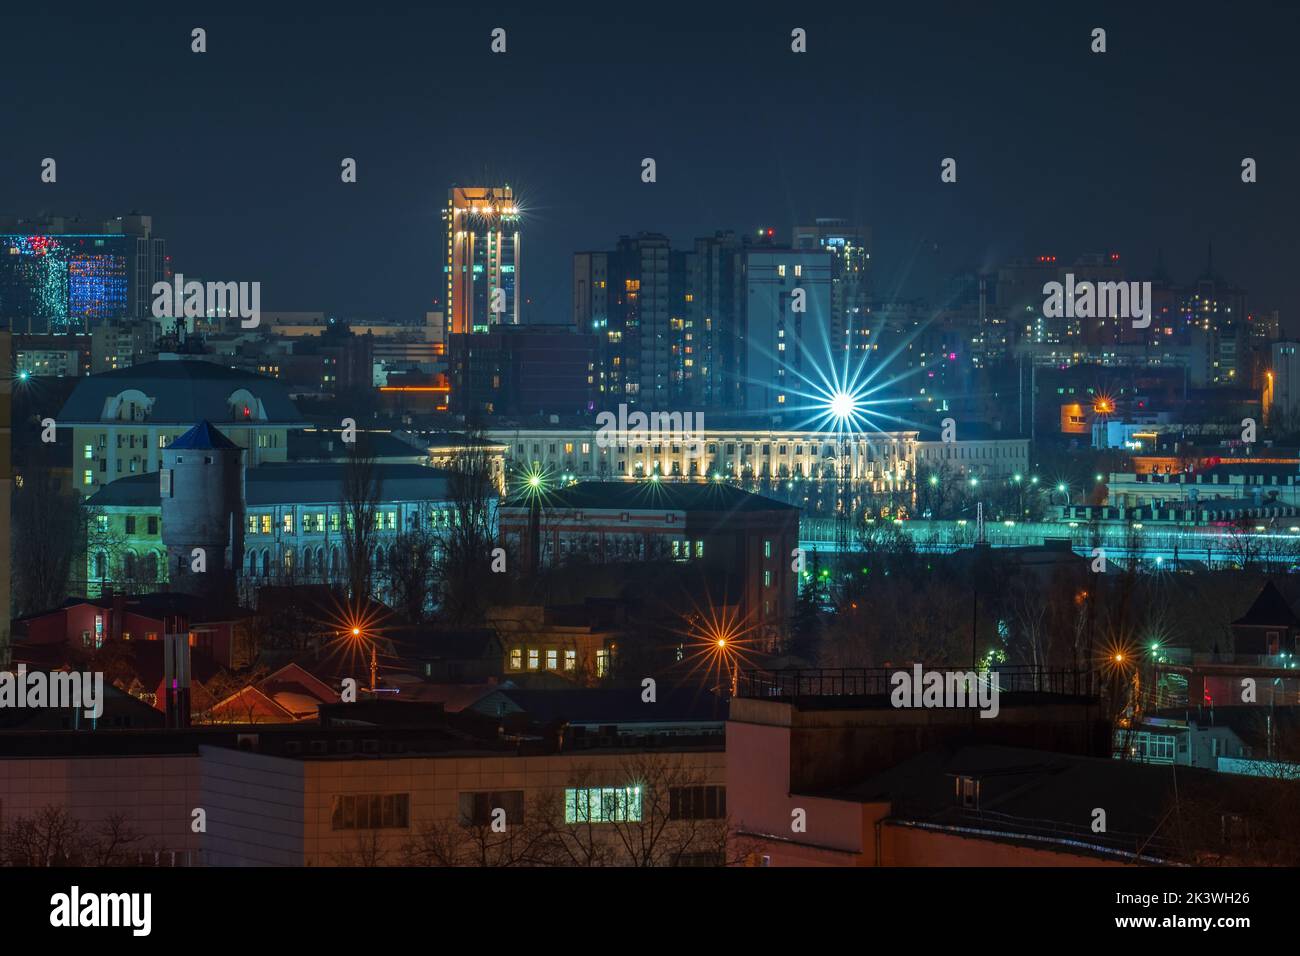 View at night city buildings with illumination. Stock Photo